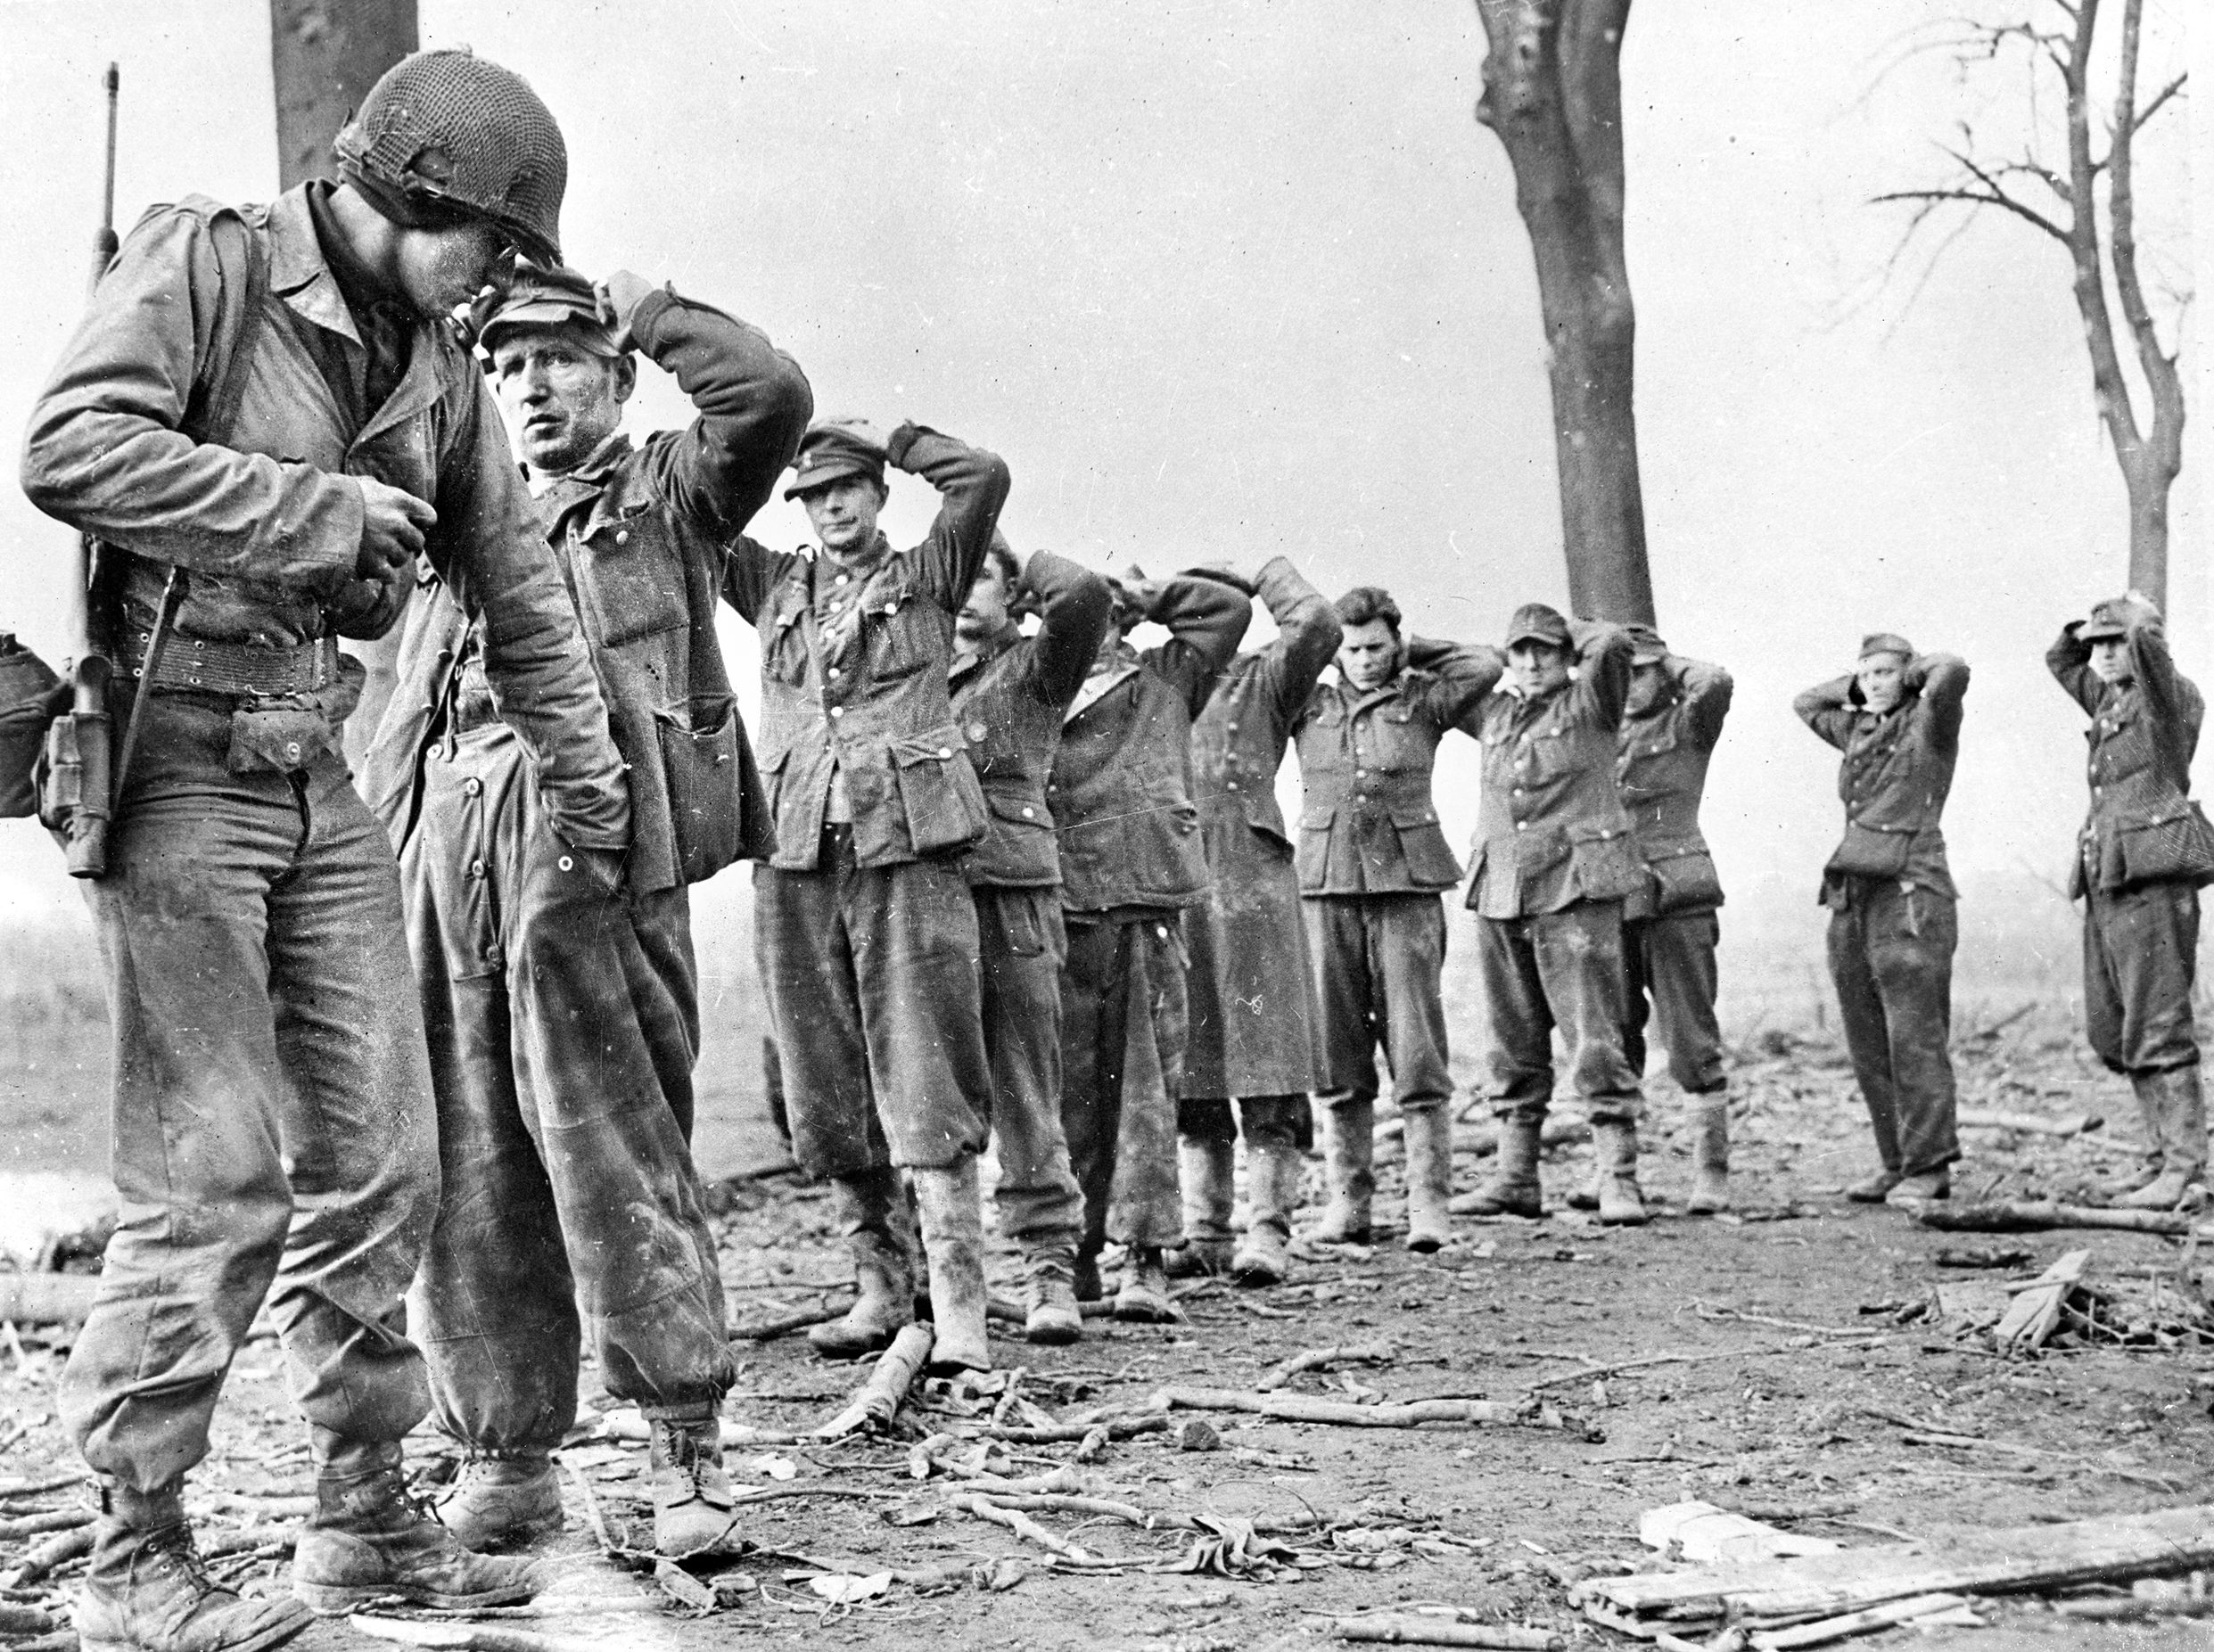  An American soldier searches surrendering German troops for weapons. Cohn served with the Prisoner of War Team 66, interviewing German soldiers and officers for intelligence and assessed buildings for use in prosecuting war criminals. 